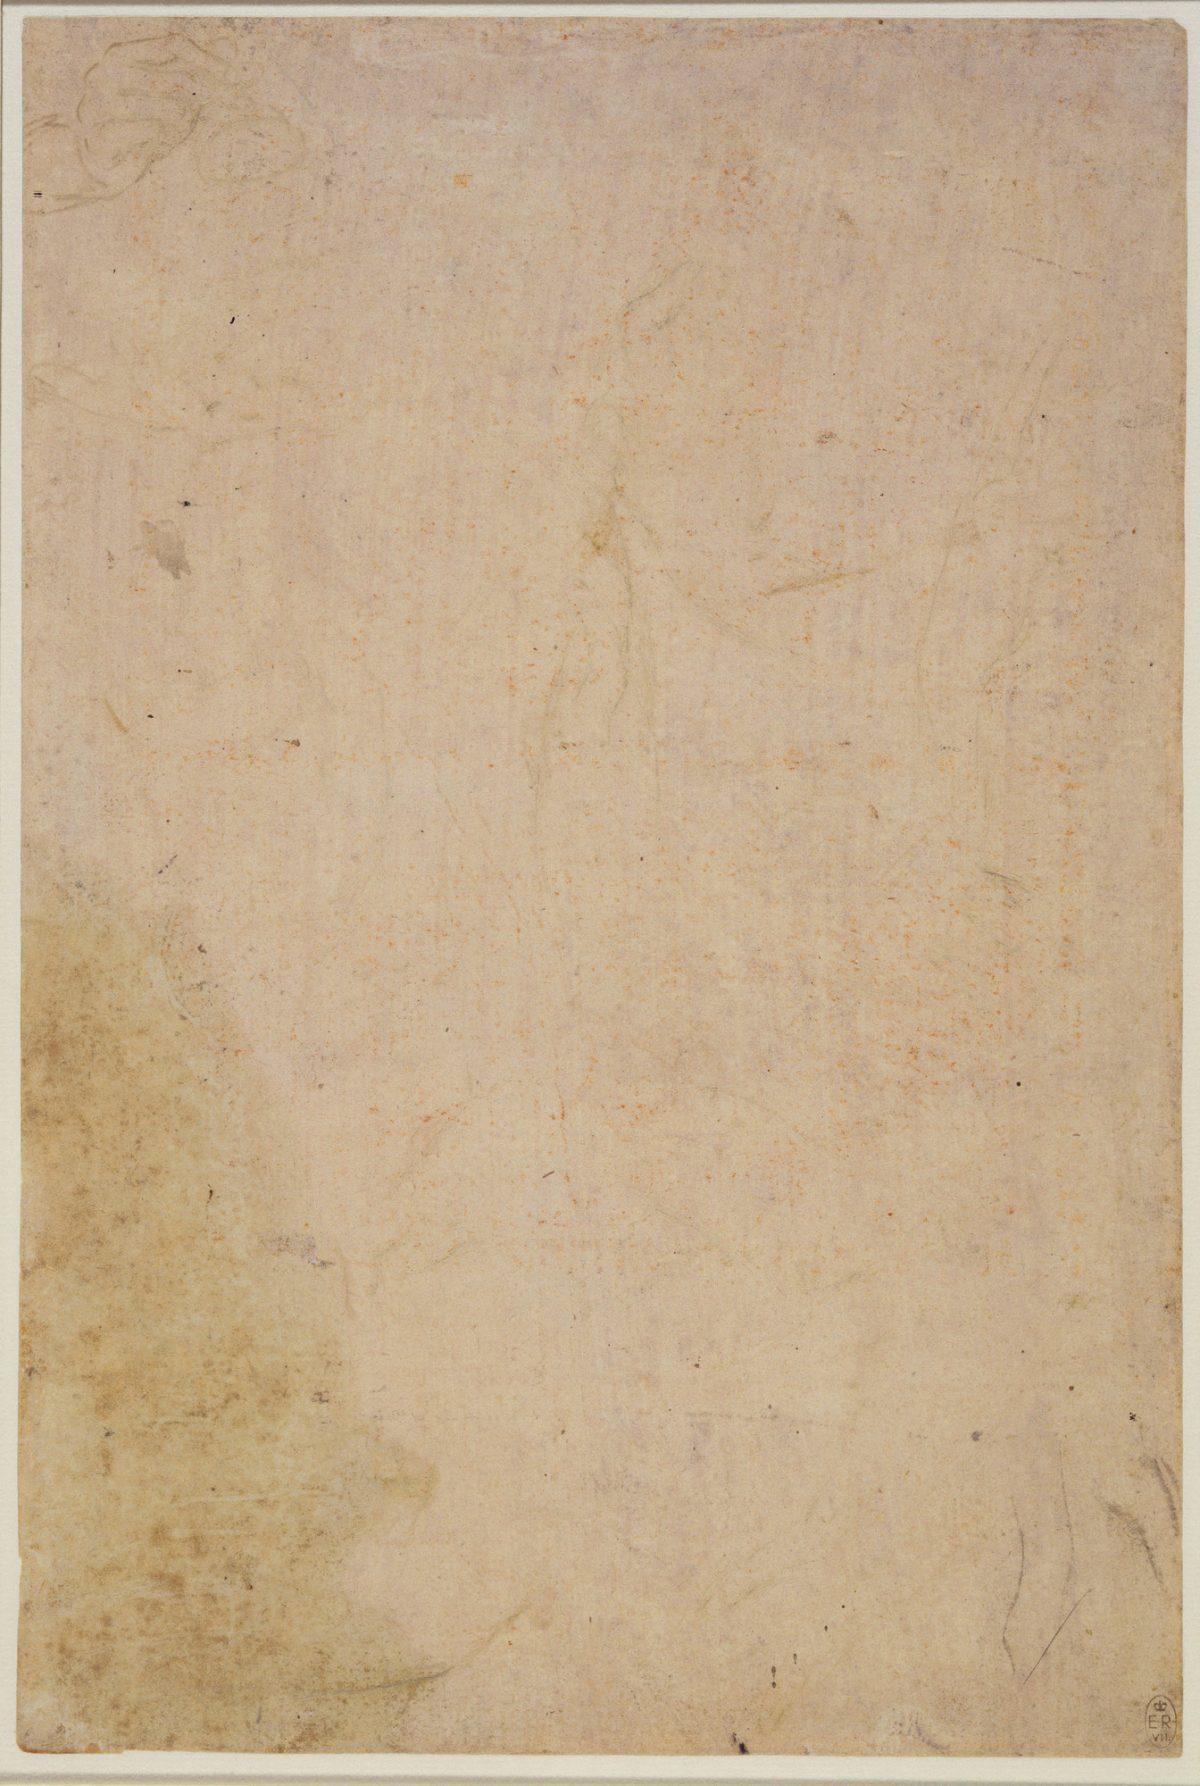 "Studies of hands for the Adoration of the Magi," sheet 2, circa 1481, by Leonardo da Vinci. Metalpoint (faded) on pink prepared paper. (Royal Collection Trust/Her Majesty Queen Elizabeth II 2019)